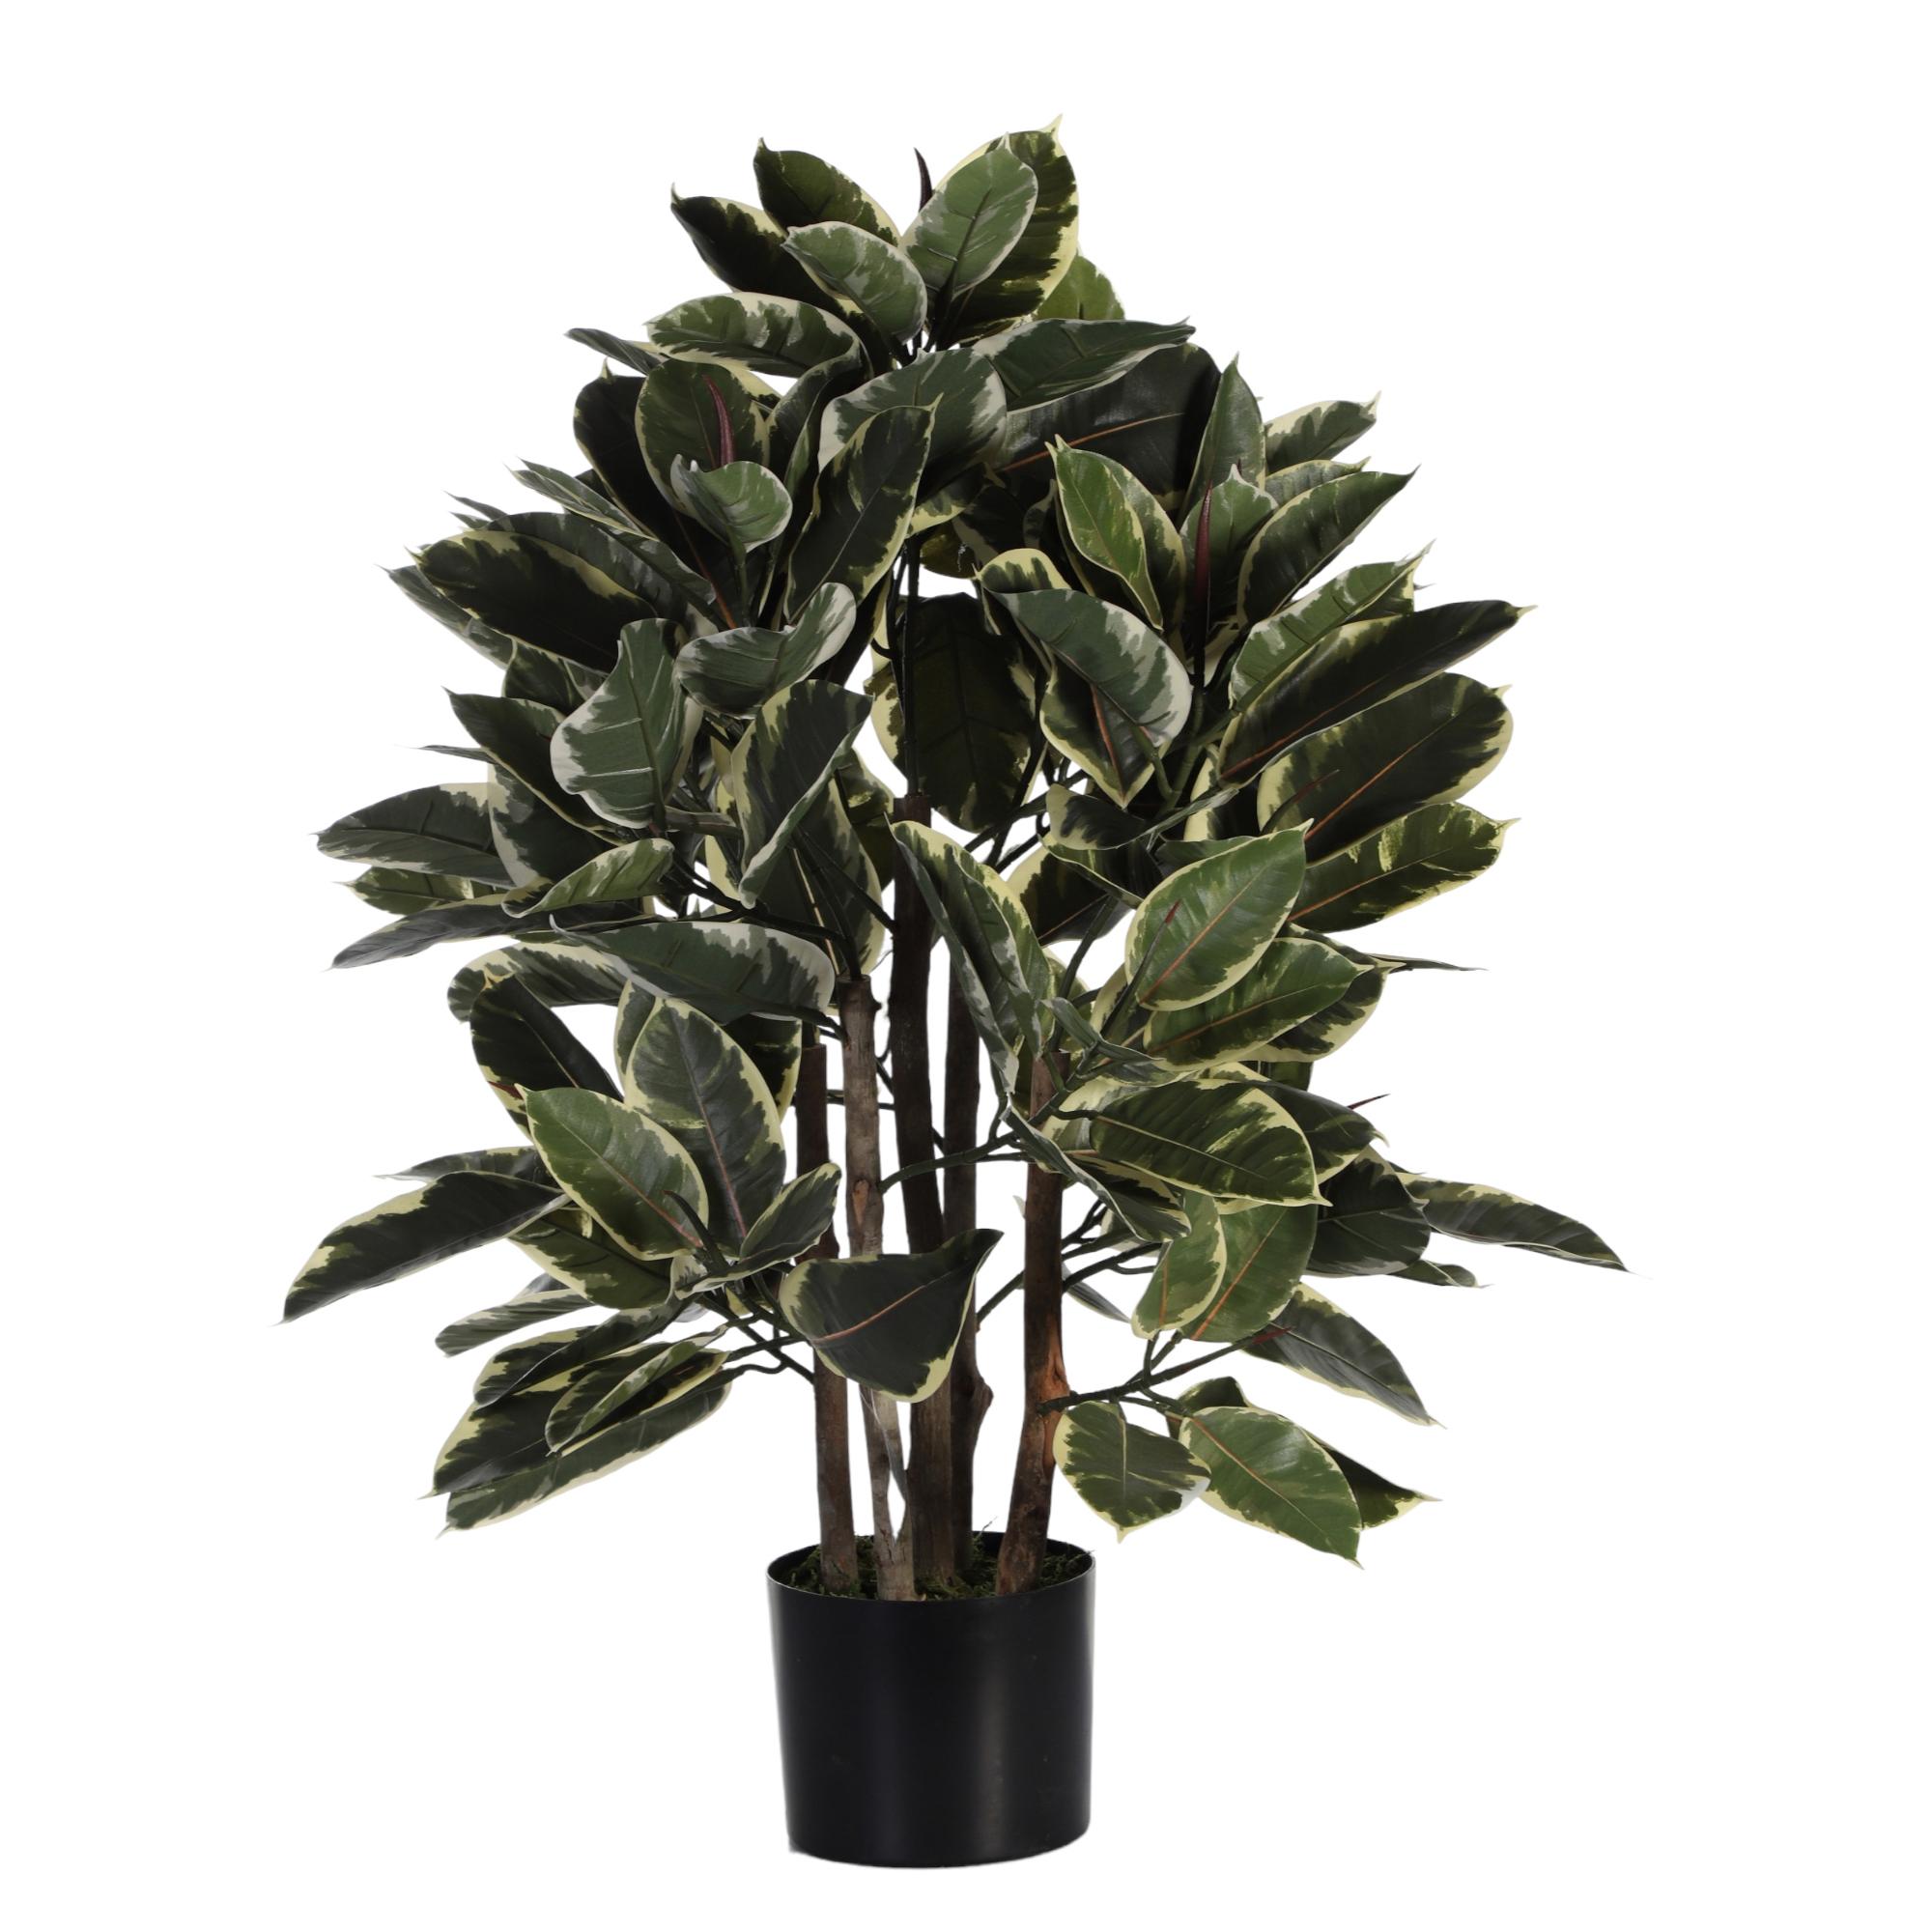 90cm Rubber tree with pot (changed to black pot) - 592-312232